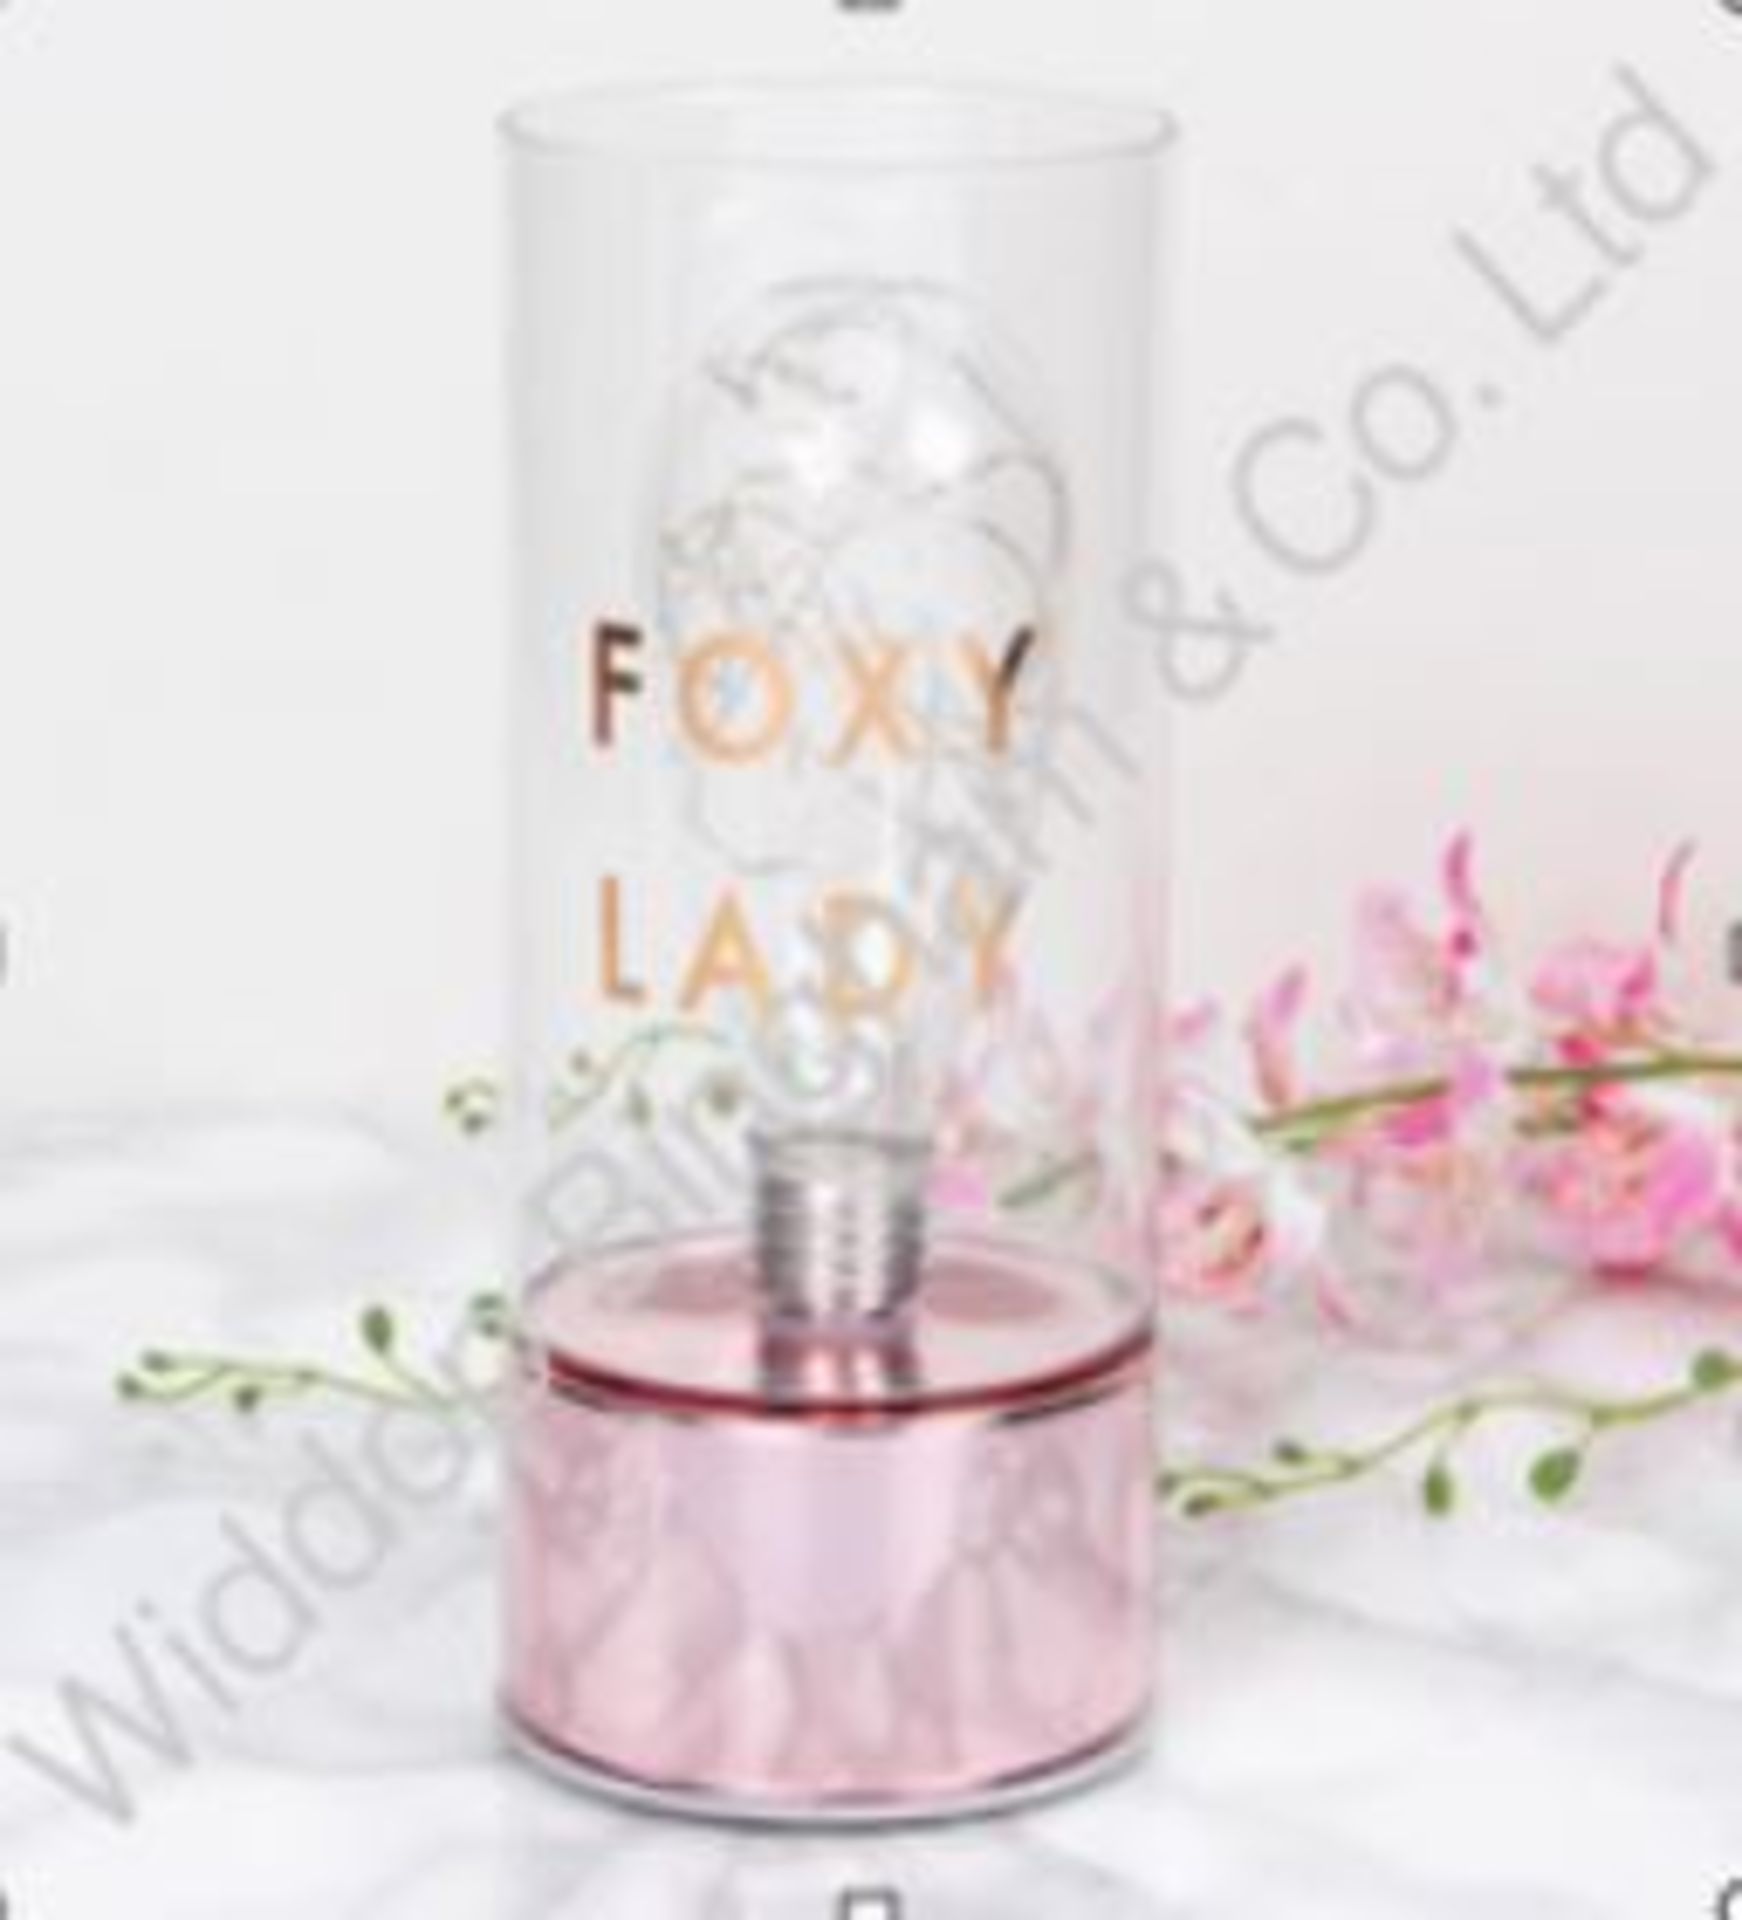 Lot to Contain 6 Brand New By Appointment Foxy Lady LED Tube Night Lights Combined RRP £96 (46597)